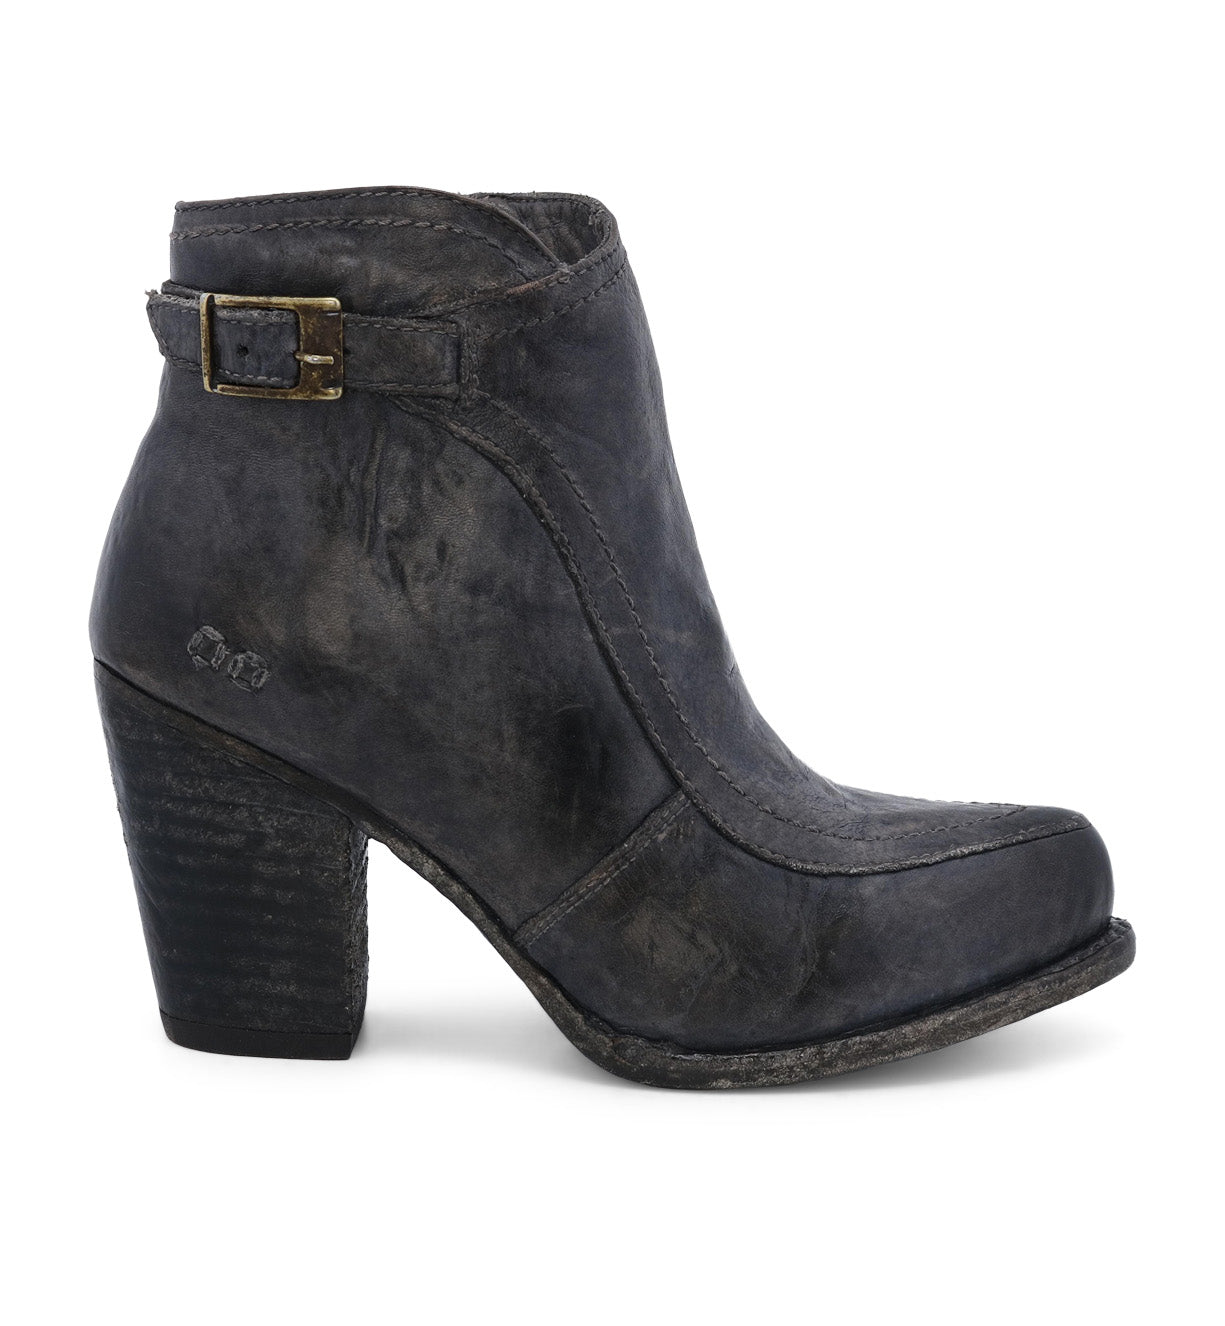 A single leather heeled ankle bootie with a vintage buckle accent against a white background. (Isla by Bed Stu)